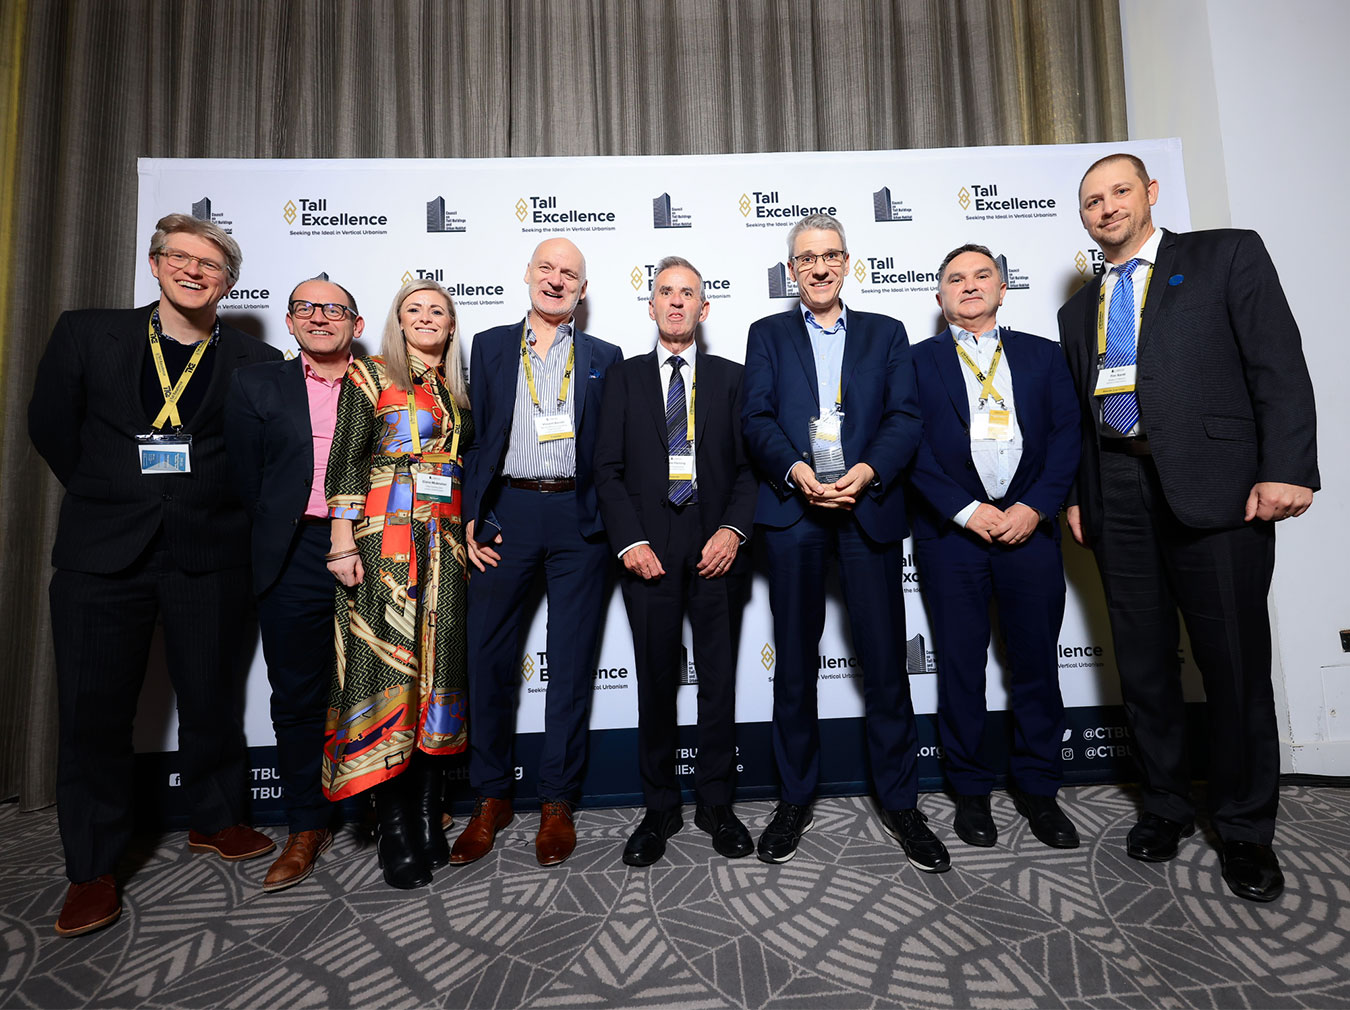 Tide sweeps board at Chicago award ceremony to reach new heights on global stage | News & Insights | Vision